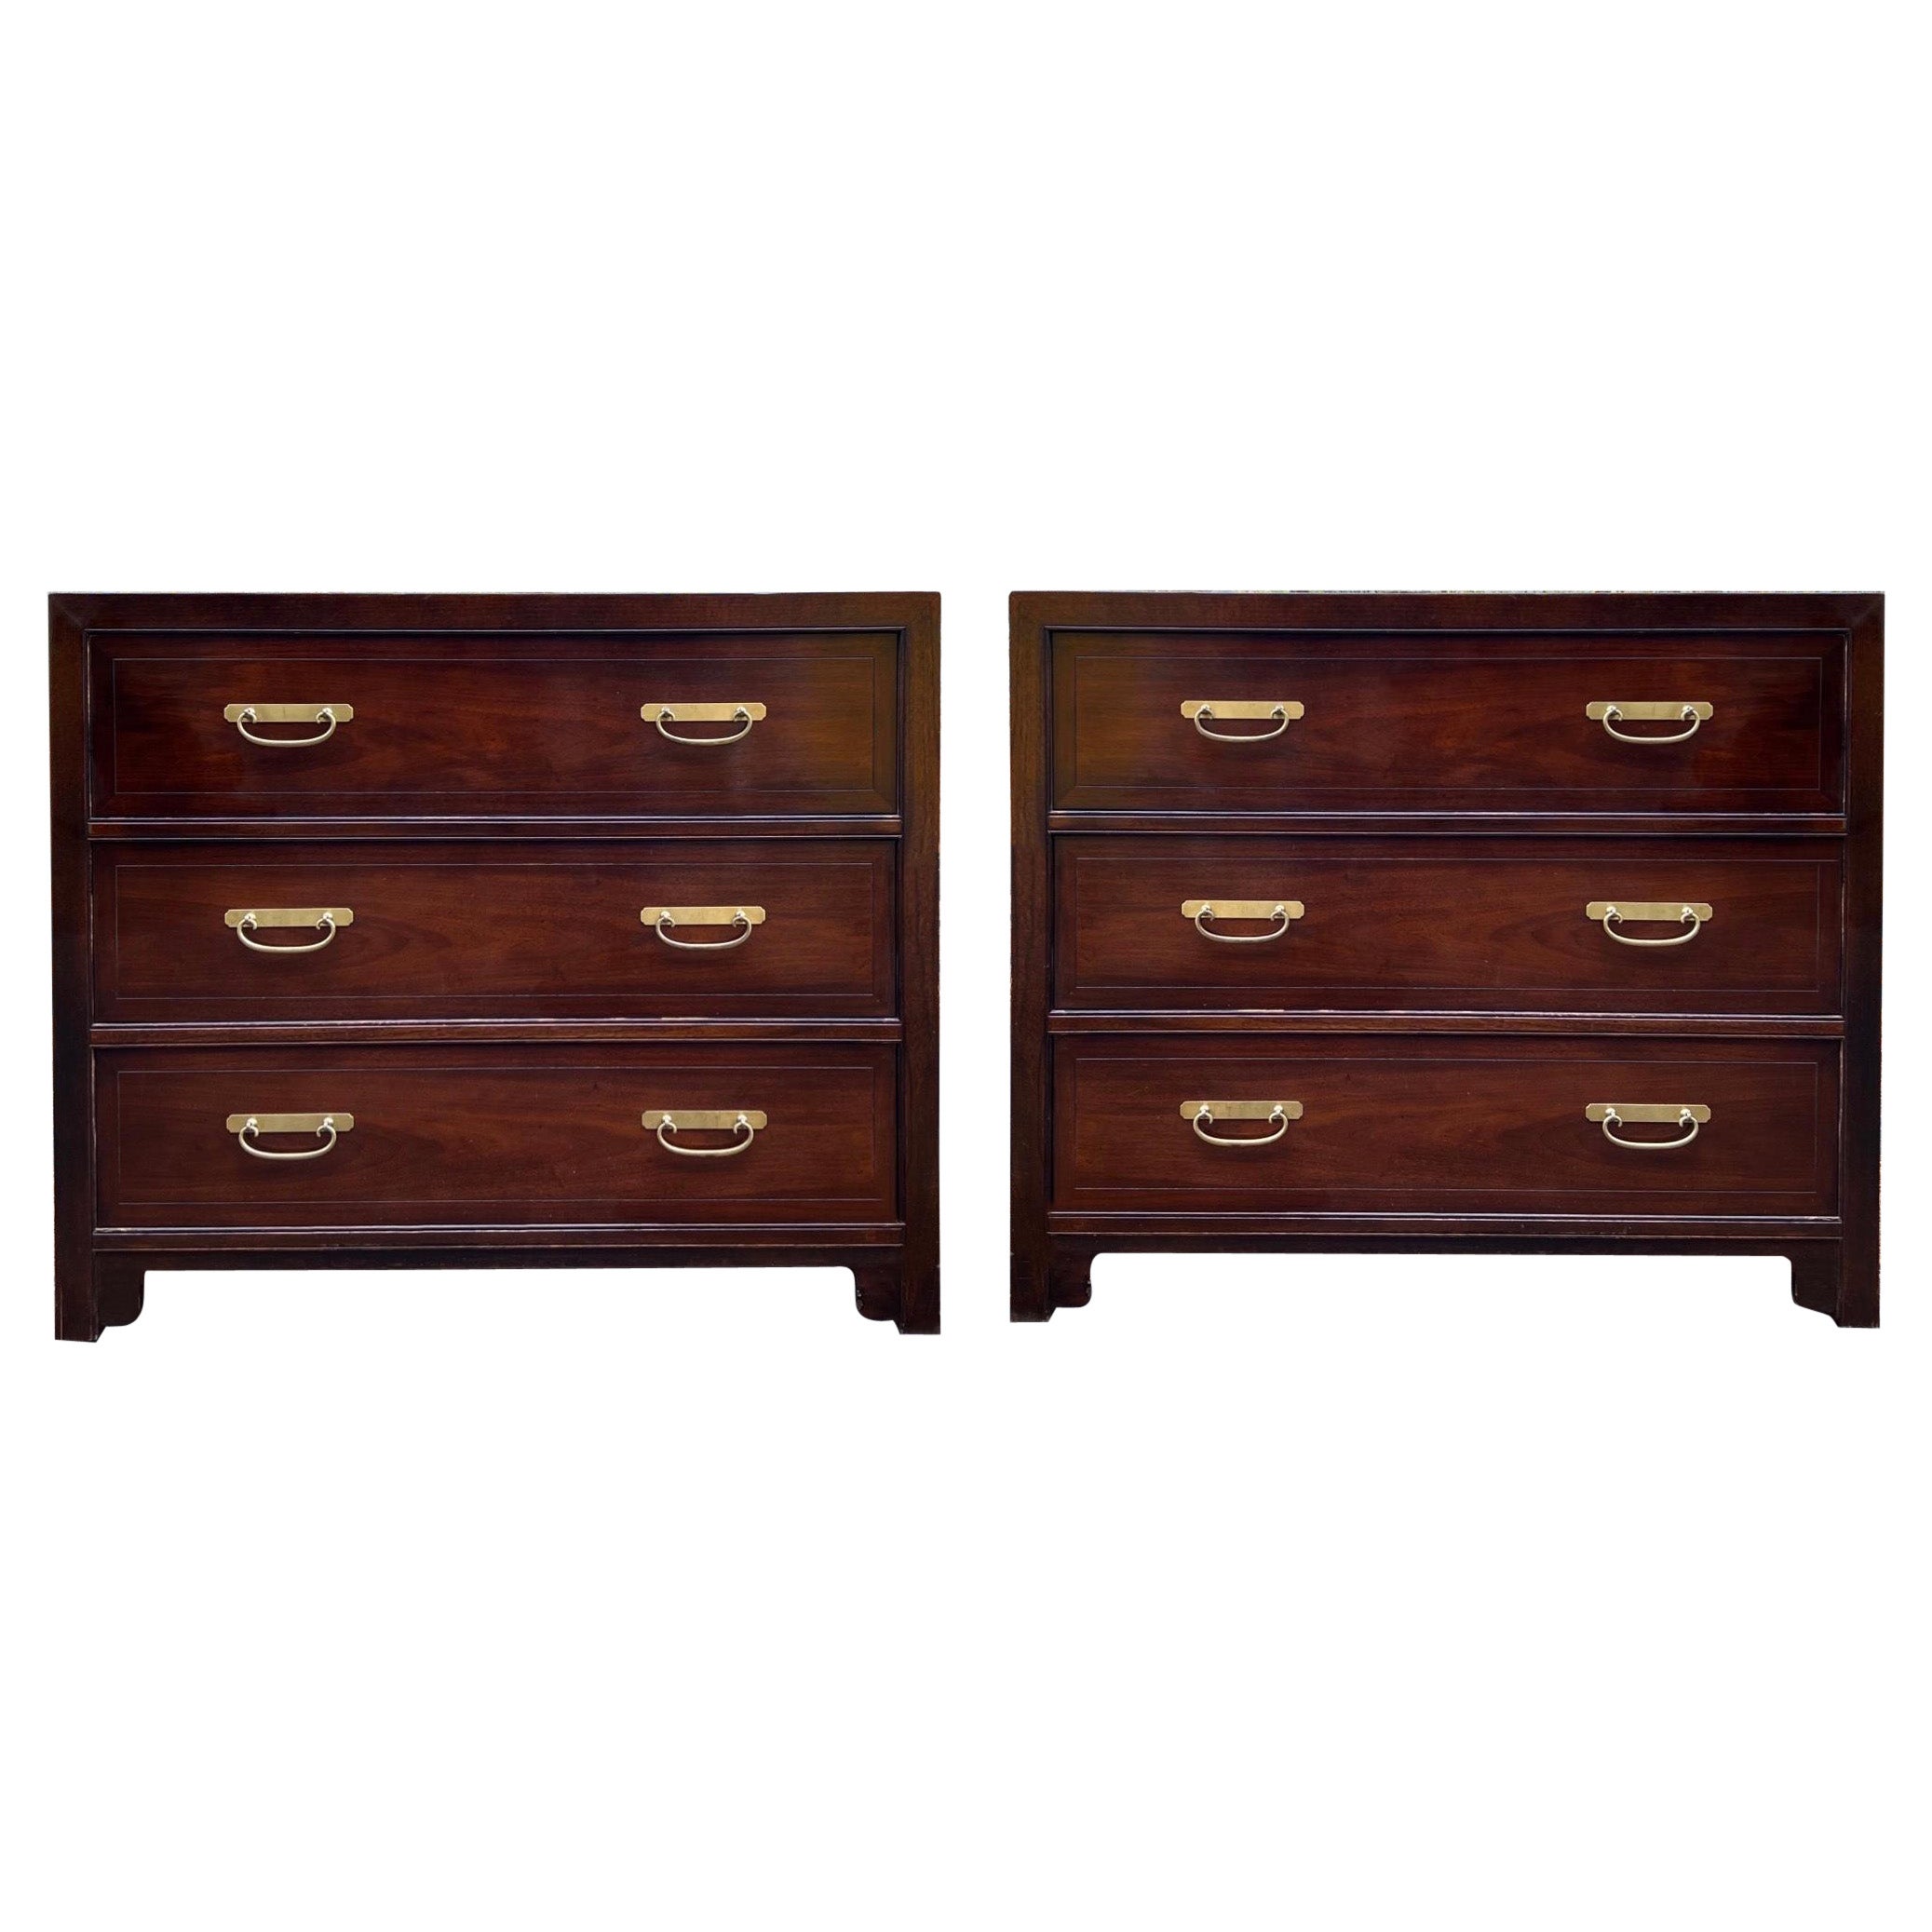 20th-C. Baker Furniture Co. Asian / Campaign Style Mahogany Chests, Pair